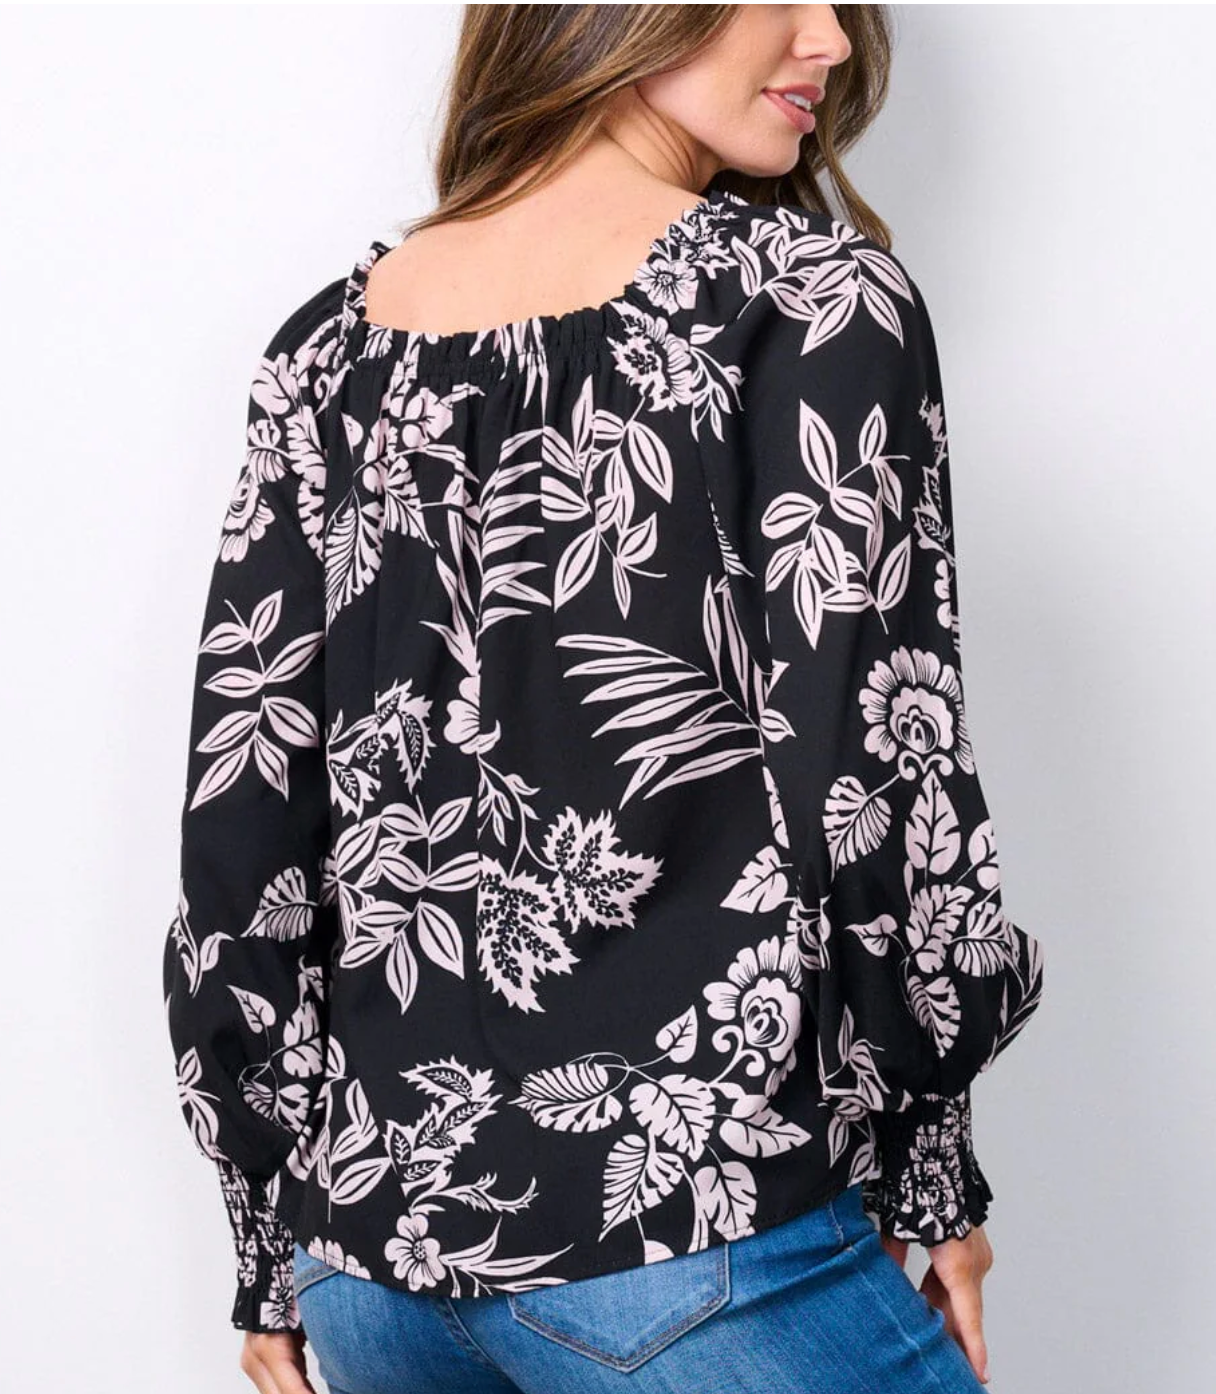 Floral Elegance: Women's Long Sleeve Smock Tunic Blouse Top